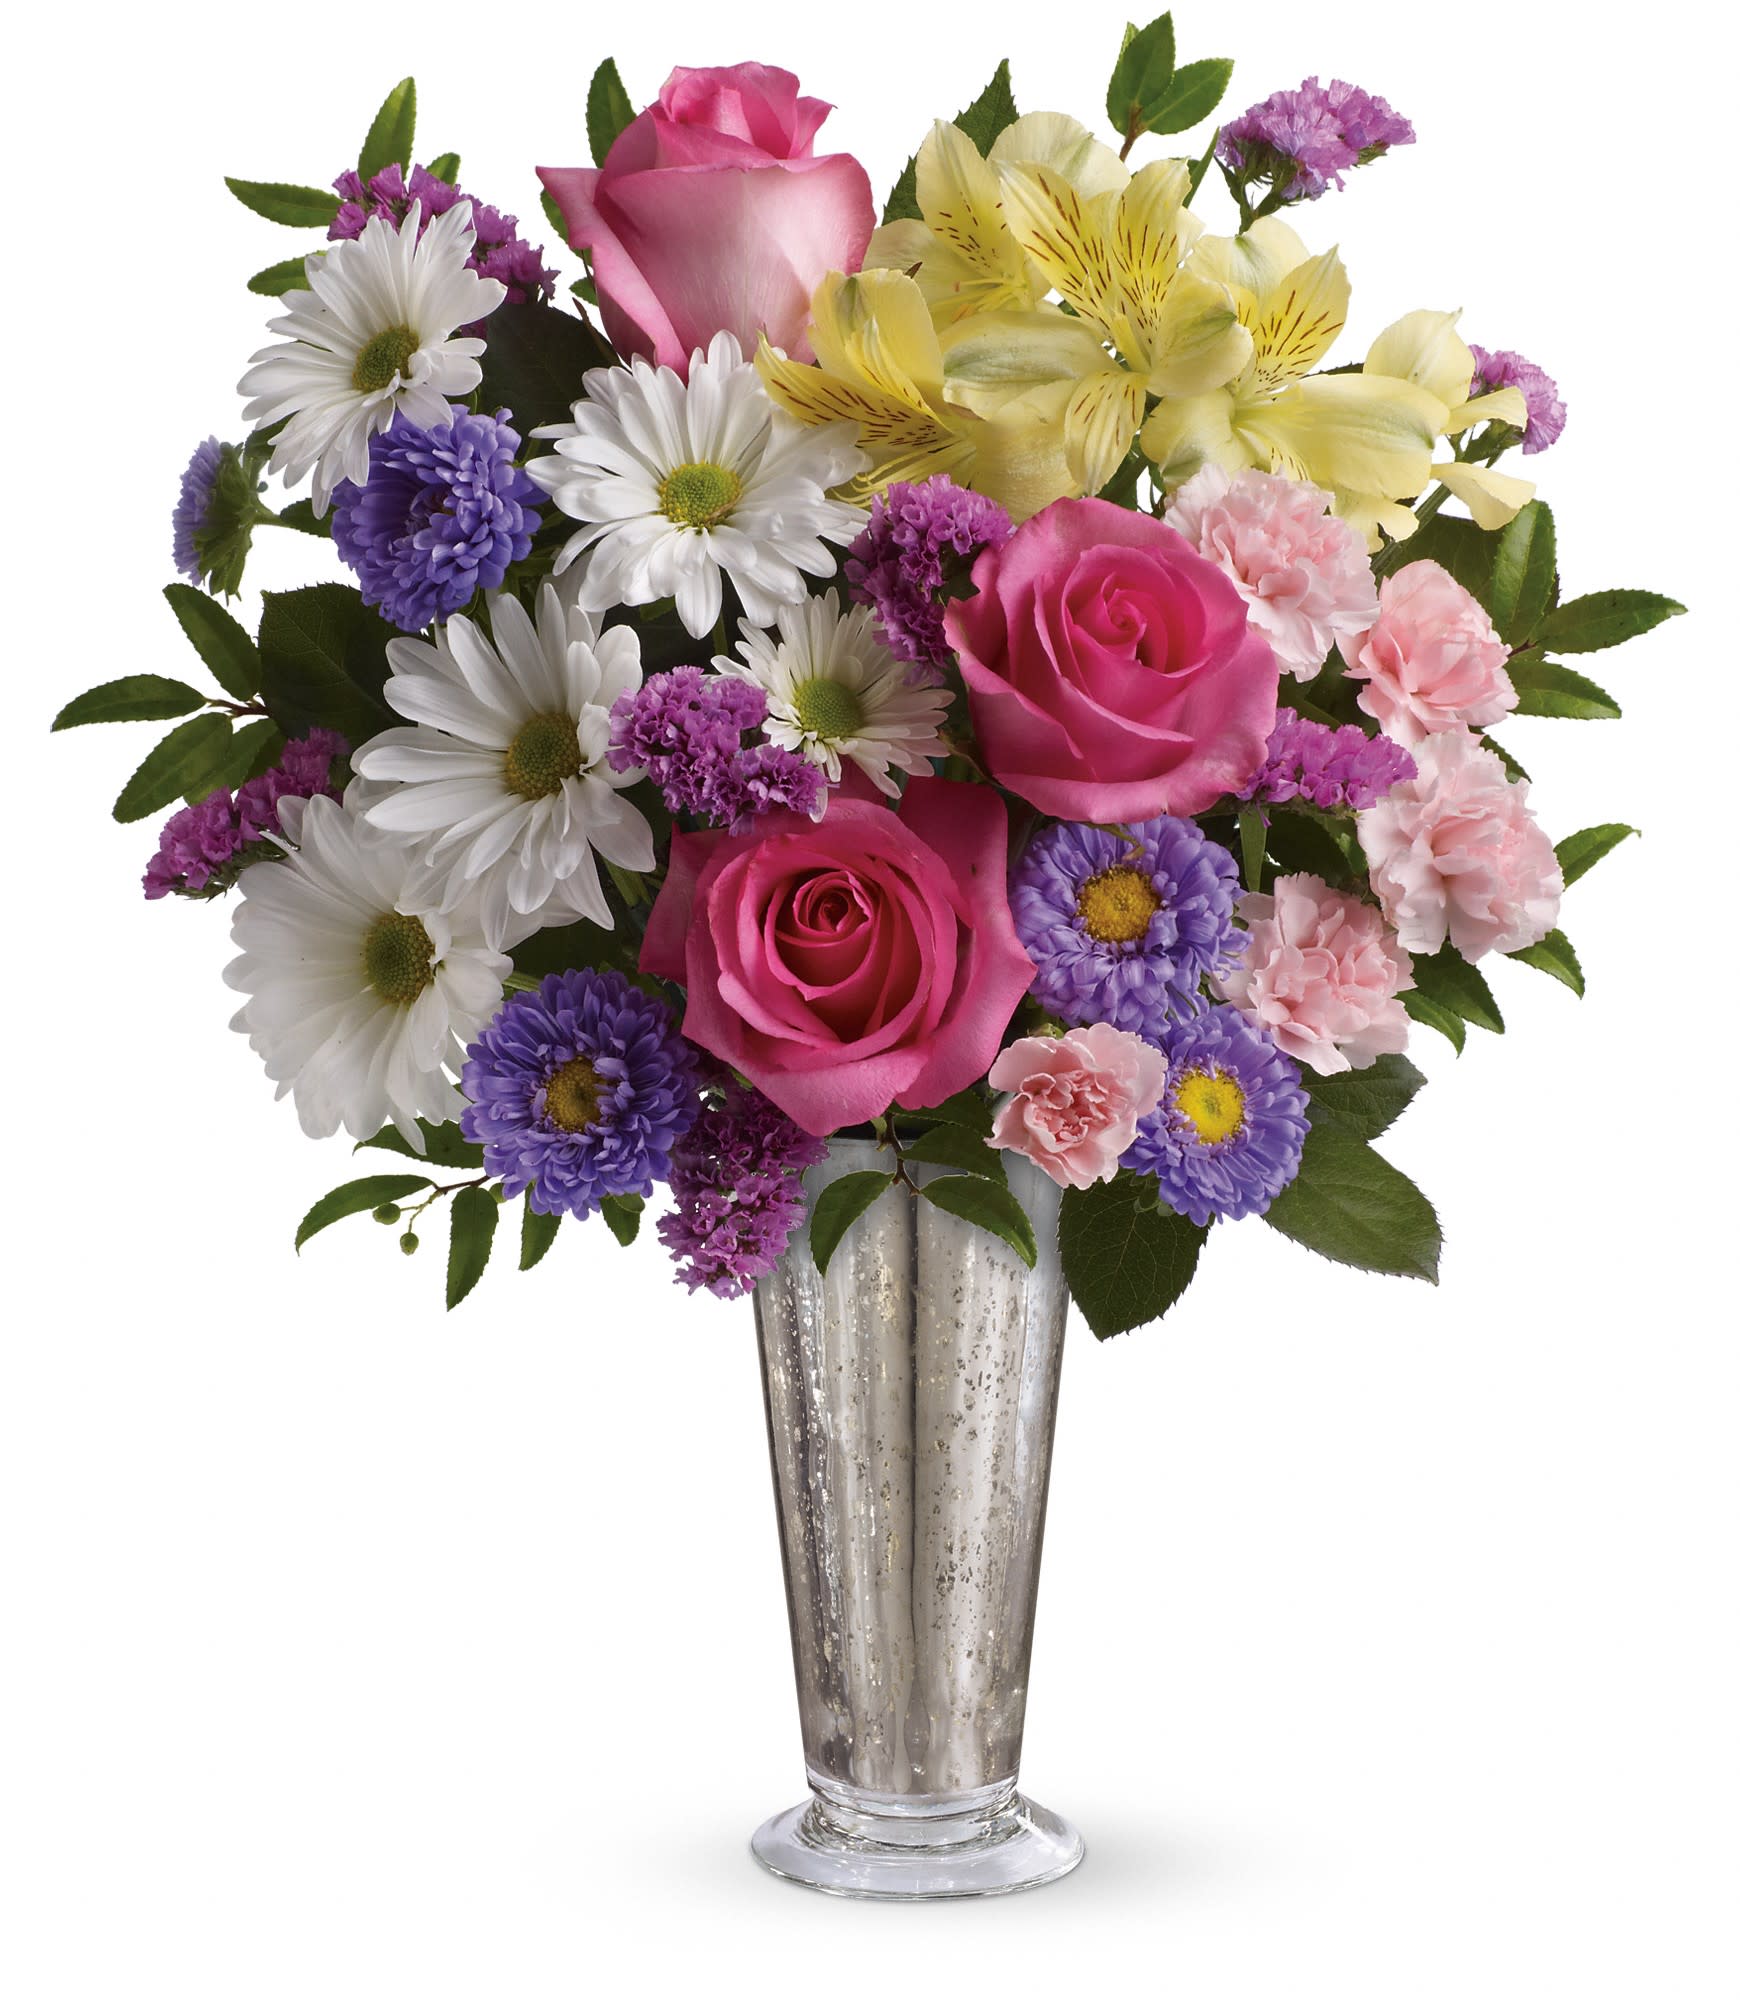 Smile and Shine Bouquet by Teleflora (TEV21-3A) - Send a shining smile to someone special with this bright bouquet! The happy mix of roses, alstroemeria and asters are presented in a popular mercury glass vase - a glittering gift for now and forever.